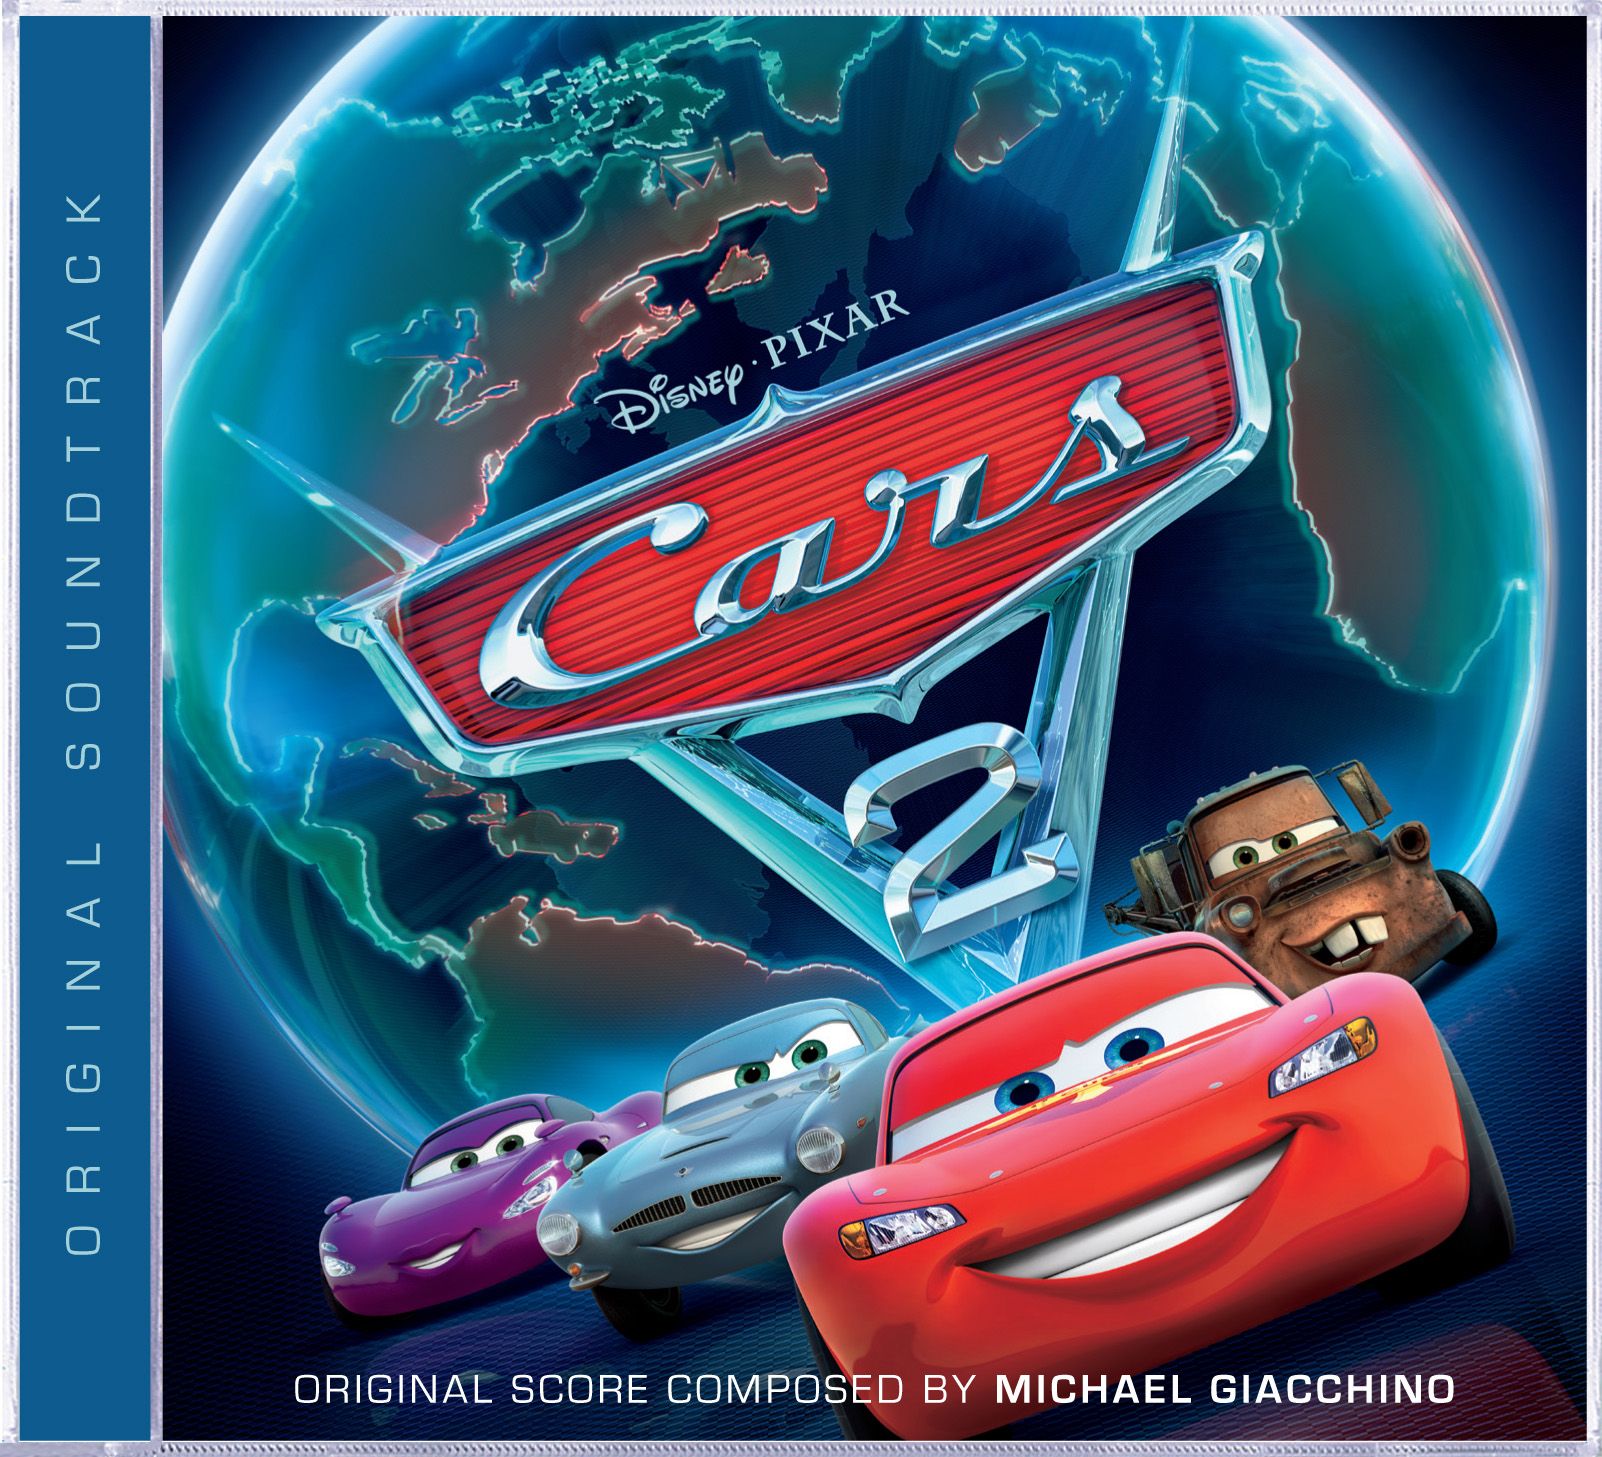 Michael Giacchino will provide the score for Cars 2Fully loaded with global locales, fast-paced racing, international espionage and a touching tale of friendship, {0} also features an amped up score by Oscar&#174 and GRAMMY&#174-winning composer {1}, plus music from alternative rock legends {2}, country music hitmaker {3}, bestselling British singer/songwriter {4}, French superstar {5} and the power pop Japanese girl band {6}. The international lineup puts the tune in tune-up as the Cars 2 chara